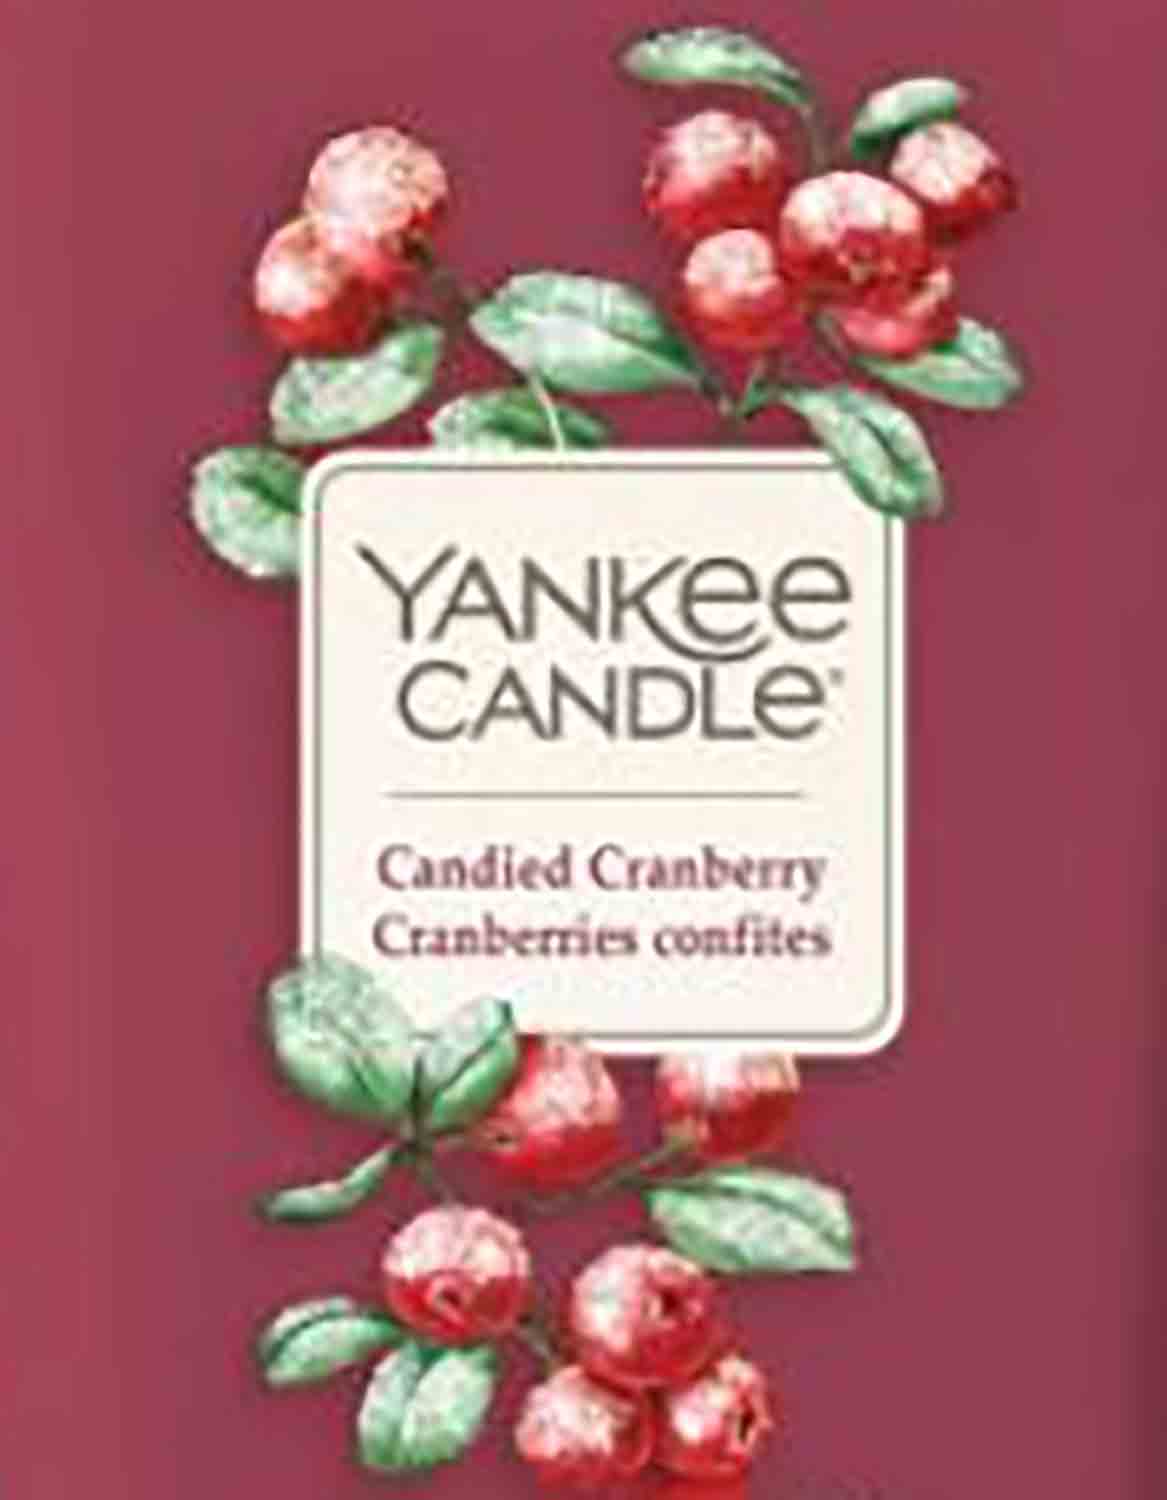 Yankee Candle Candied Cramberry 22 g - Crumble vosk